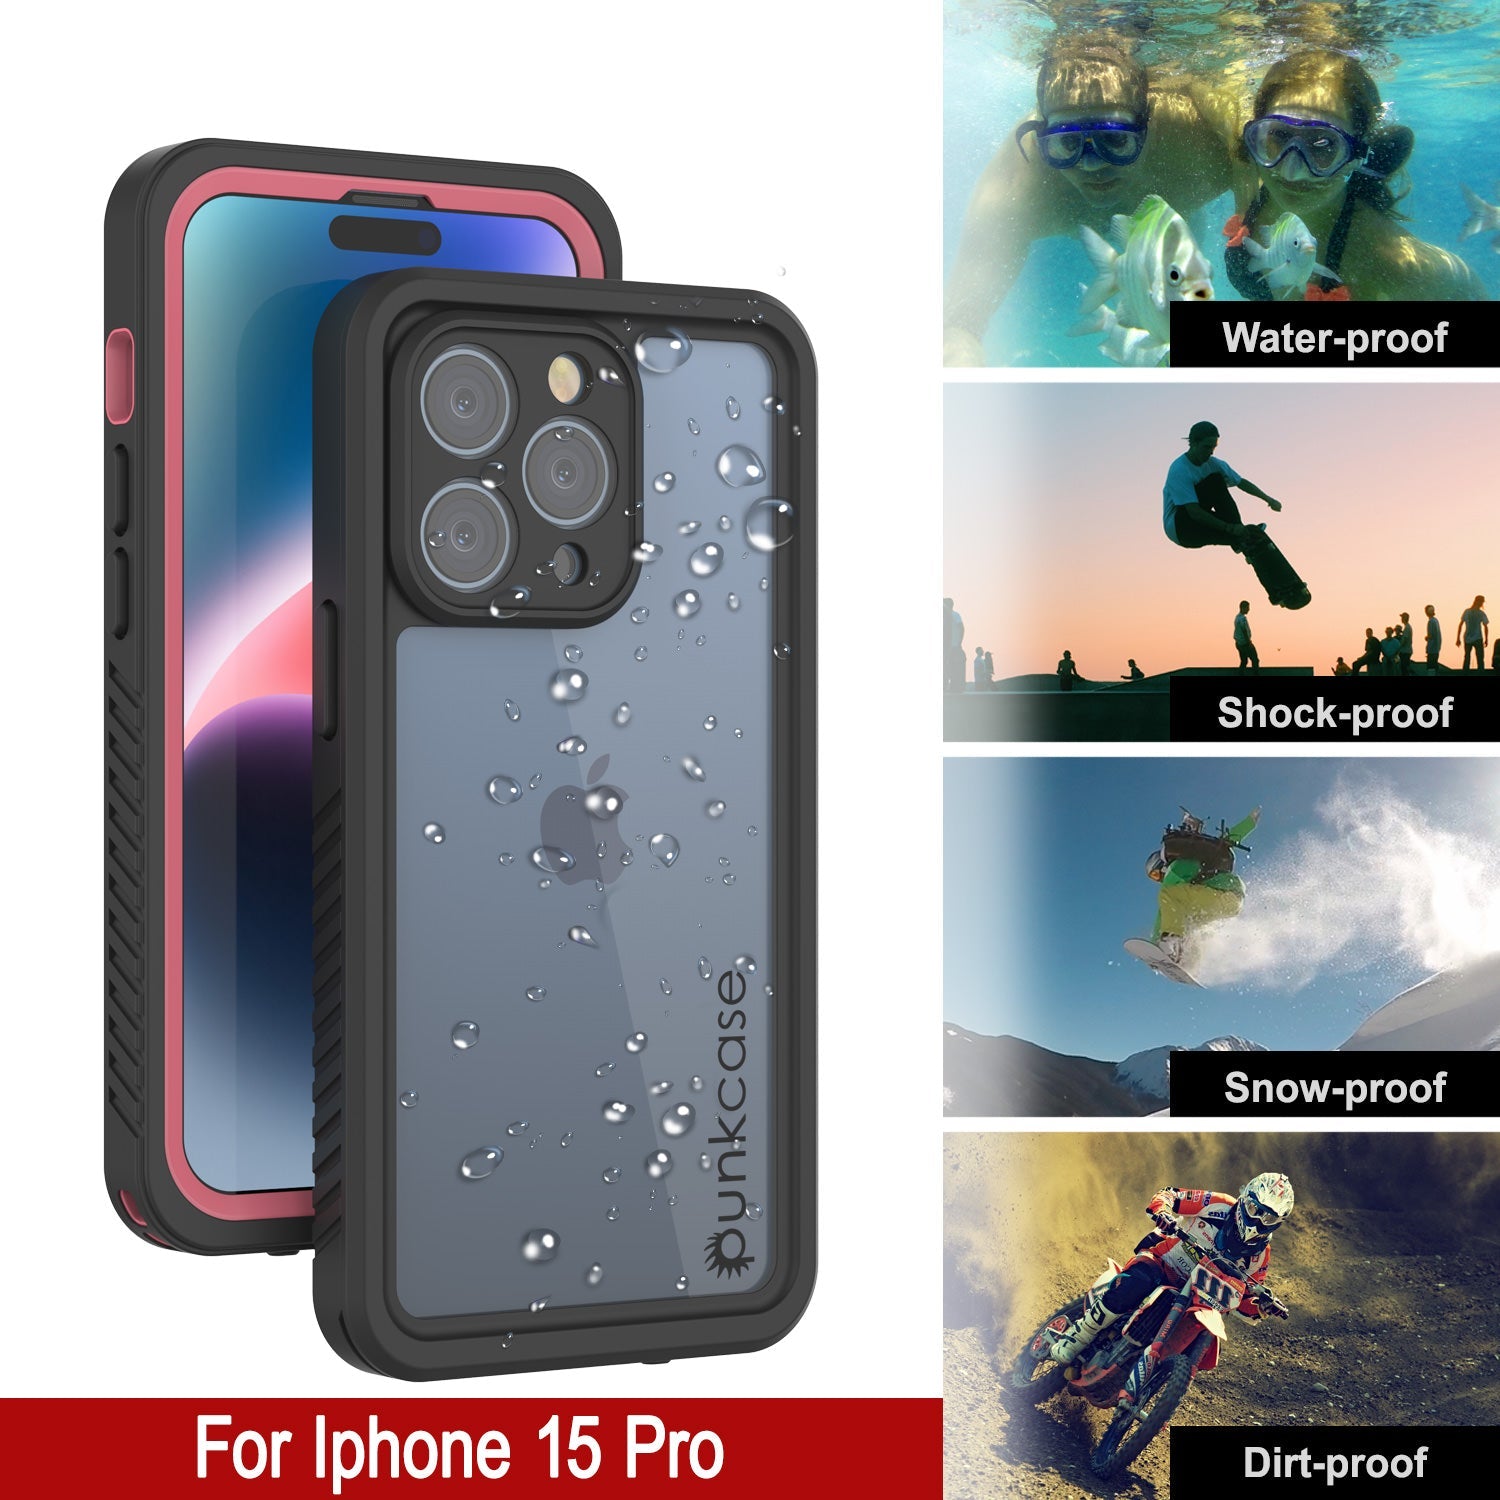 iPhone 15 Pro Waterproof Case, Punkcase [Extreme Series] Armor Cover W/ Built In Screen Protector [Pink]